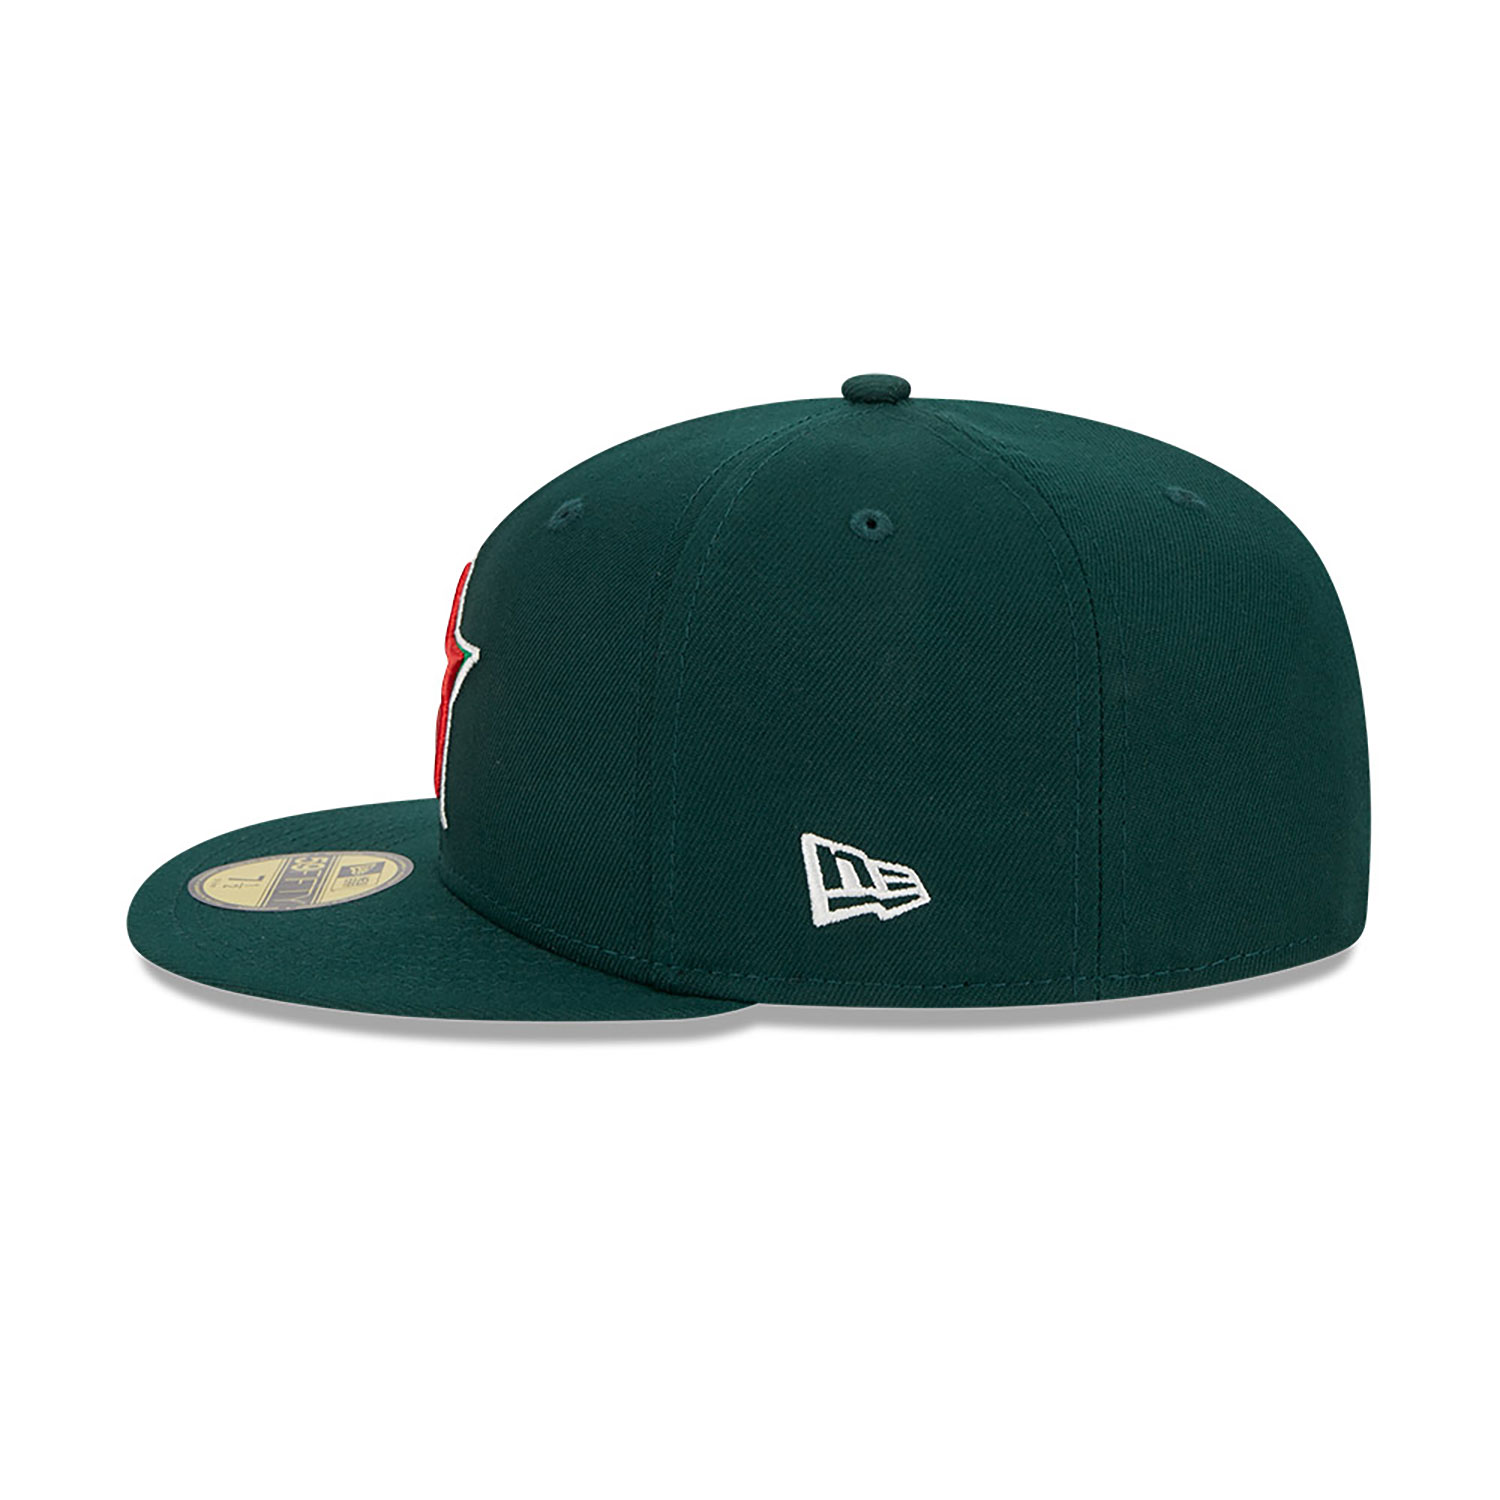 Houston Astros Spice Berry Dark Green 59FIFTY Fitted Cap